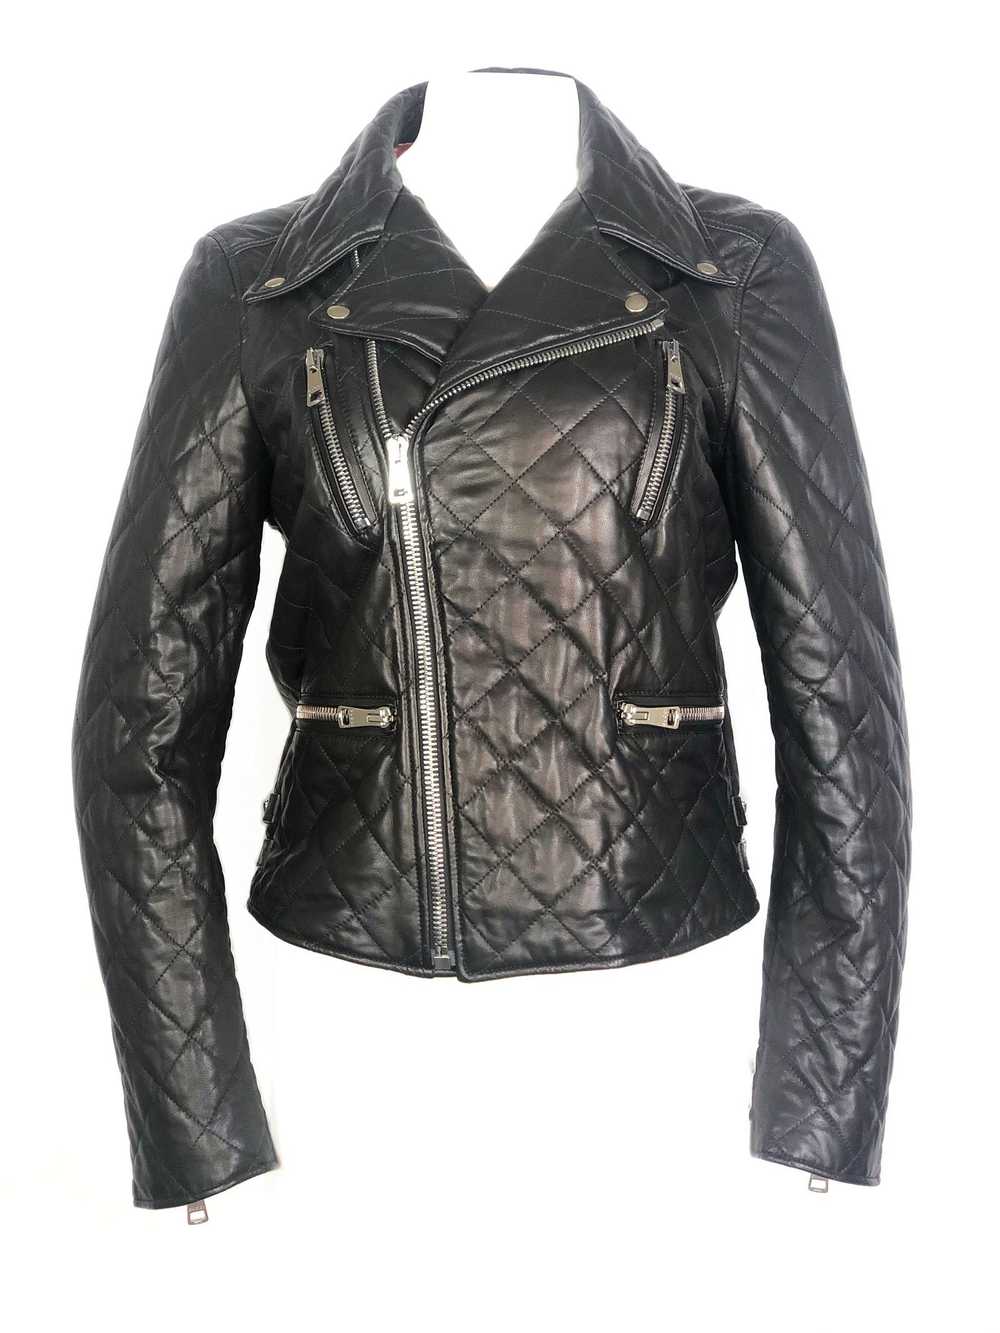 GUCCI Brown Leather Moto Jacket w/ Pearls Size 44 - image 2